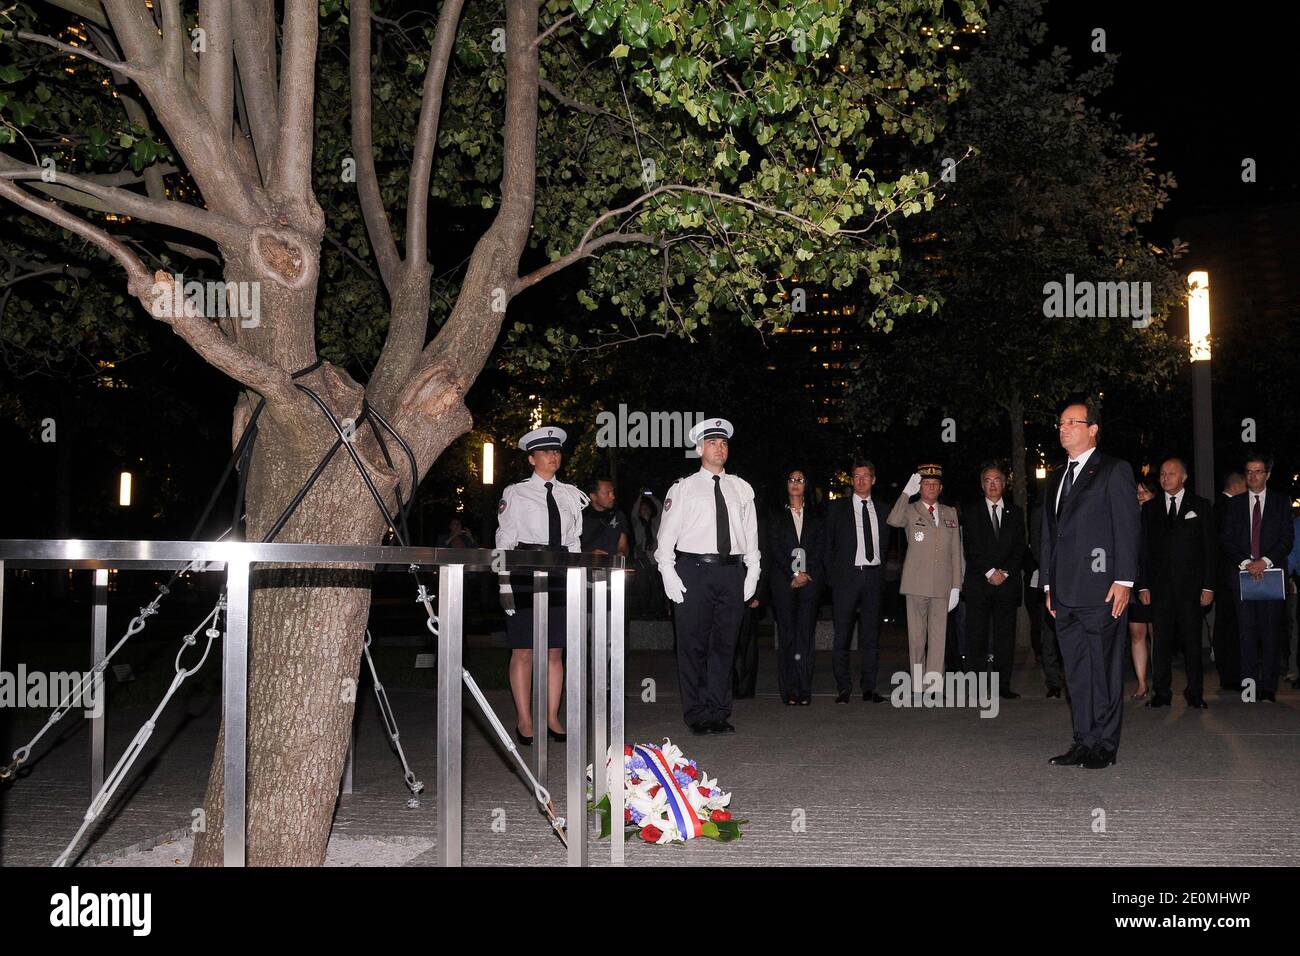 French President Francois Hollande stand in silence after laying a memorial wreath during his visit to the Ground Zero 911 Memorial Park on September 25, 2012, New York, NY, USA. Photo by Anthony Behar/Pool/ABACAPRESS.COM Stock Photo